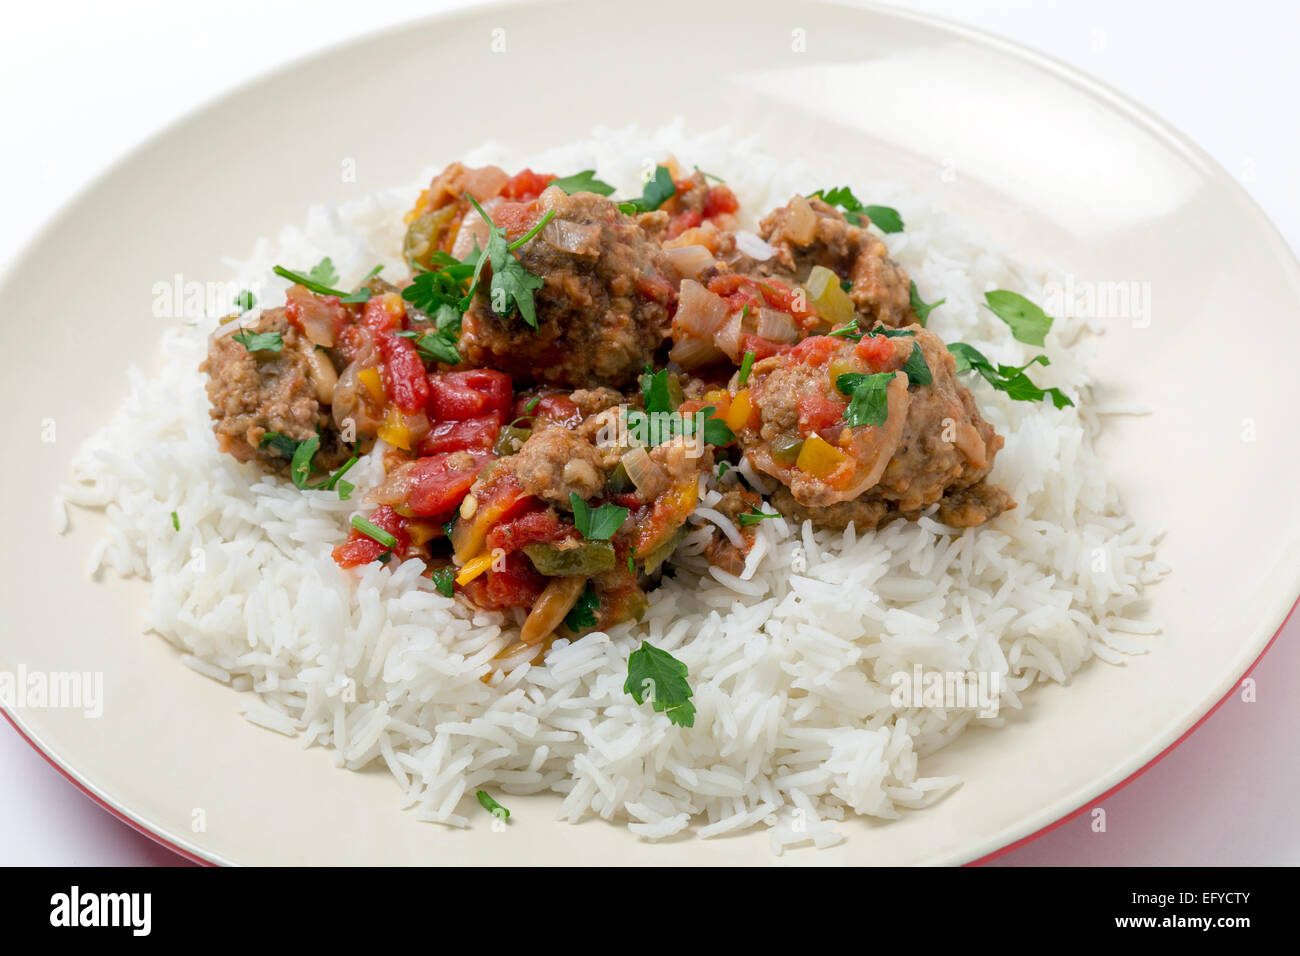 Meatballs Smyrna  cooked with a sauce of cumin, red and yellow capsicums and tomatoes, making a colourful and tasty dish Stock Photo